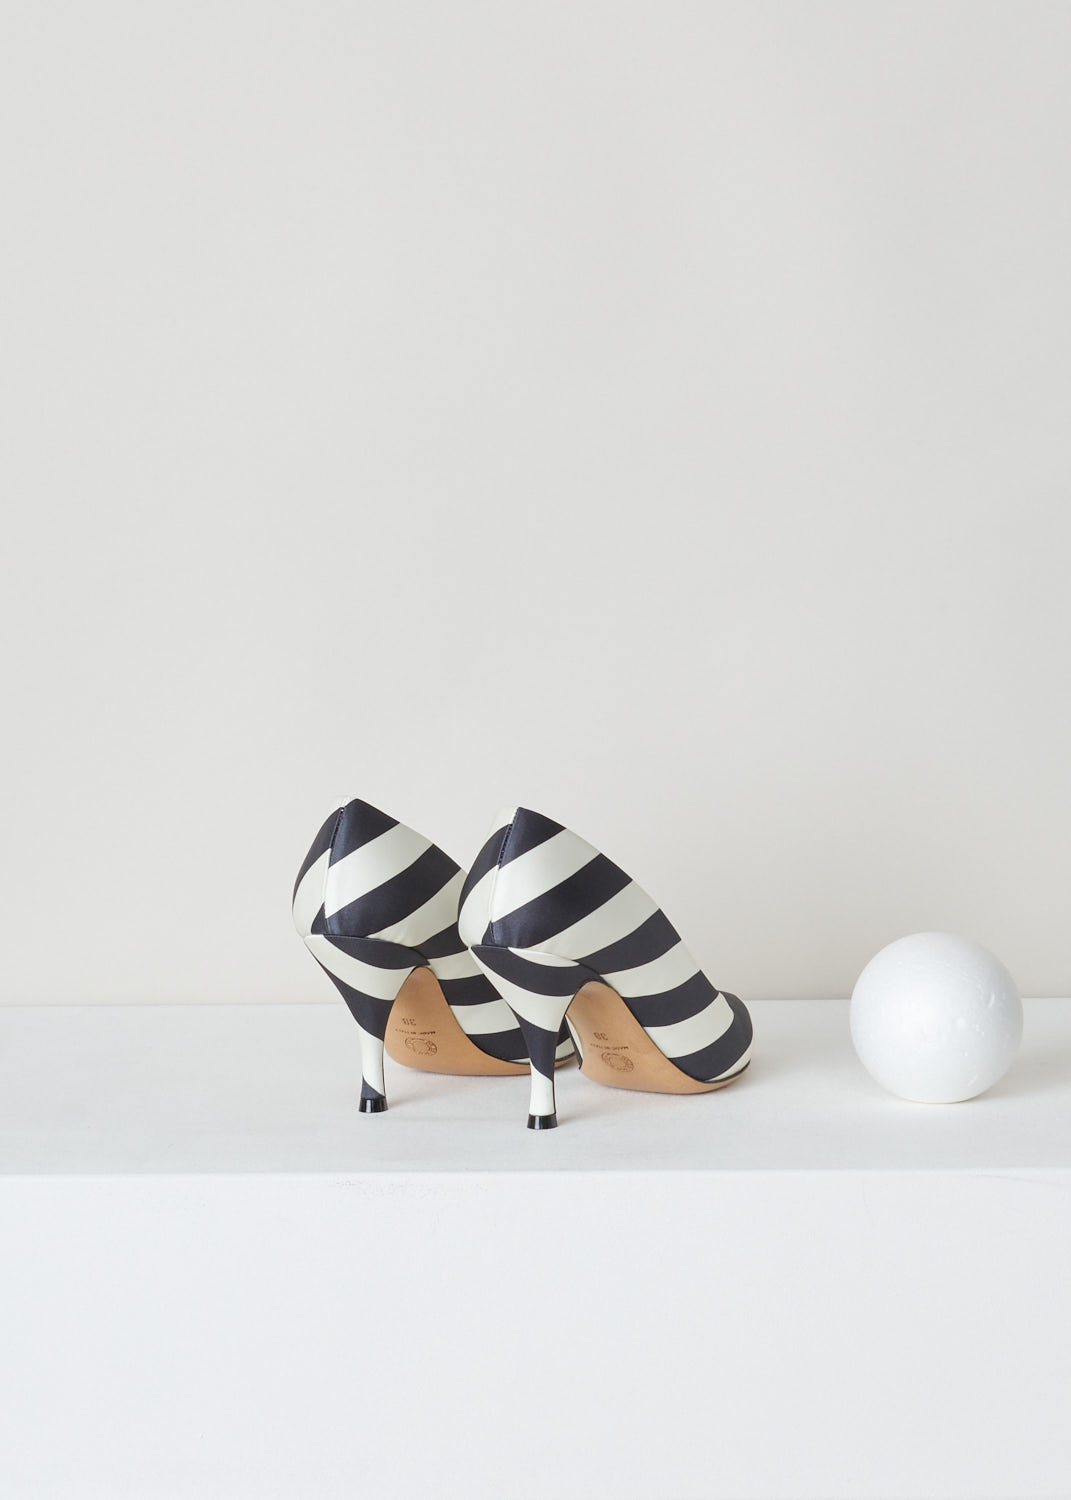 Dries van Noten, Black and white striped pumps, WS25_153_80_QU160_black900, black white, back,  Black and white colored pump, featuring a tapered heel and pointed toe. 

Heel height: 8 cm / 3.14 inch. 